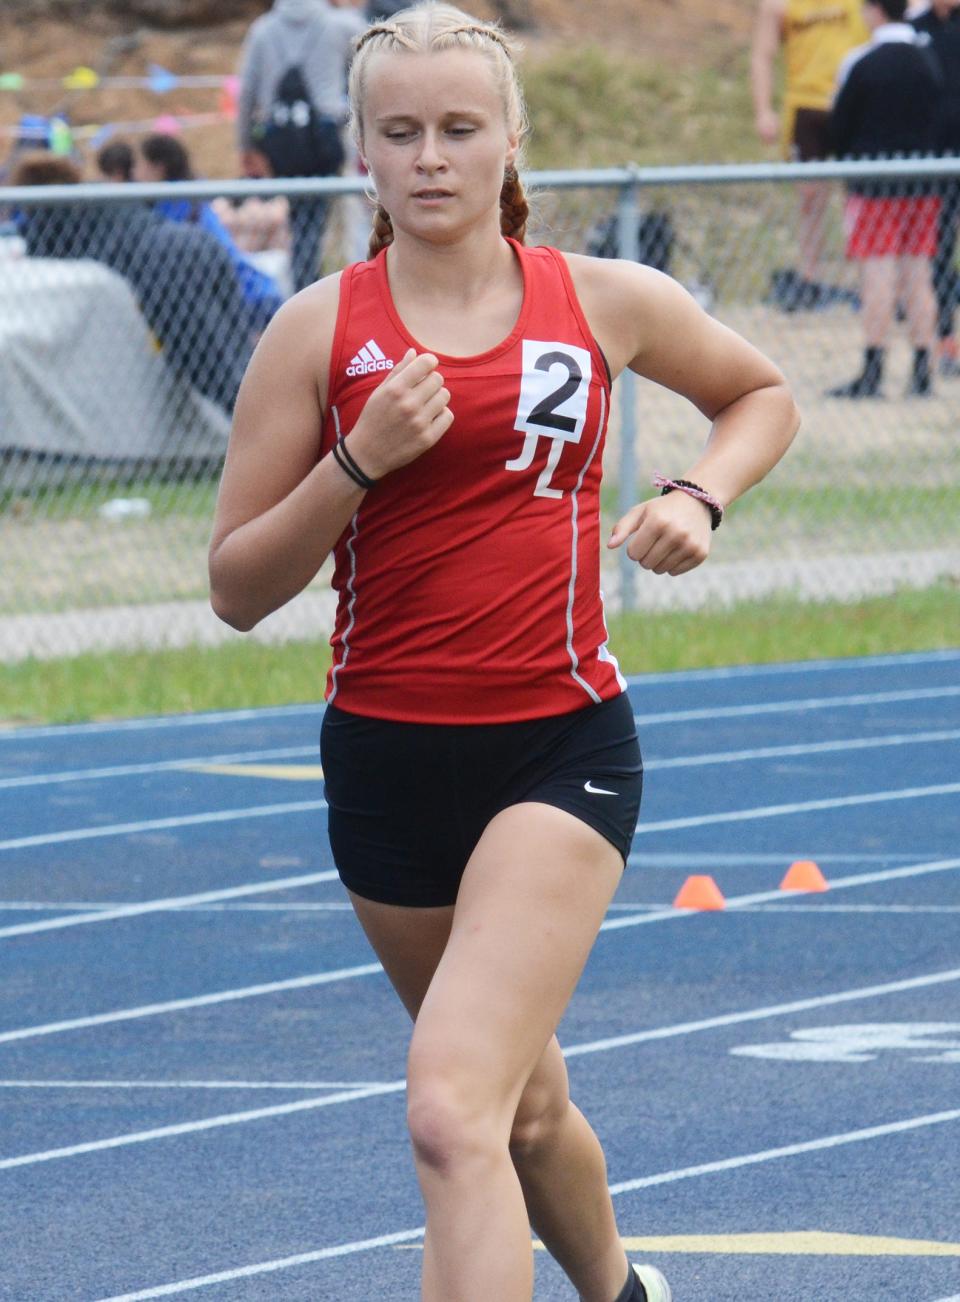 Allie Nowak participates in the 1600-meter run during the MHSAA Region 31-4 track meet on Friday, May 19 in Indian River, Mich.